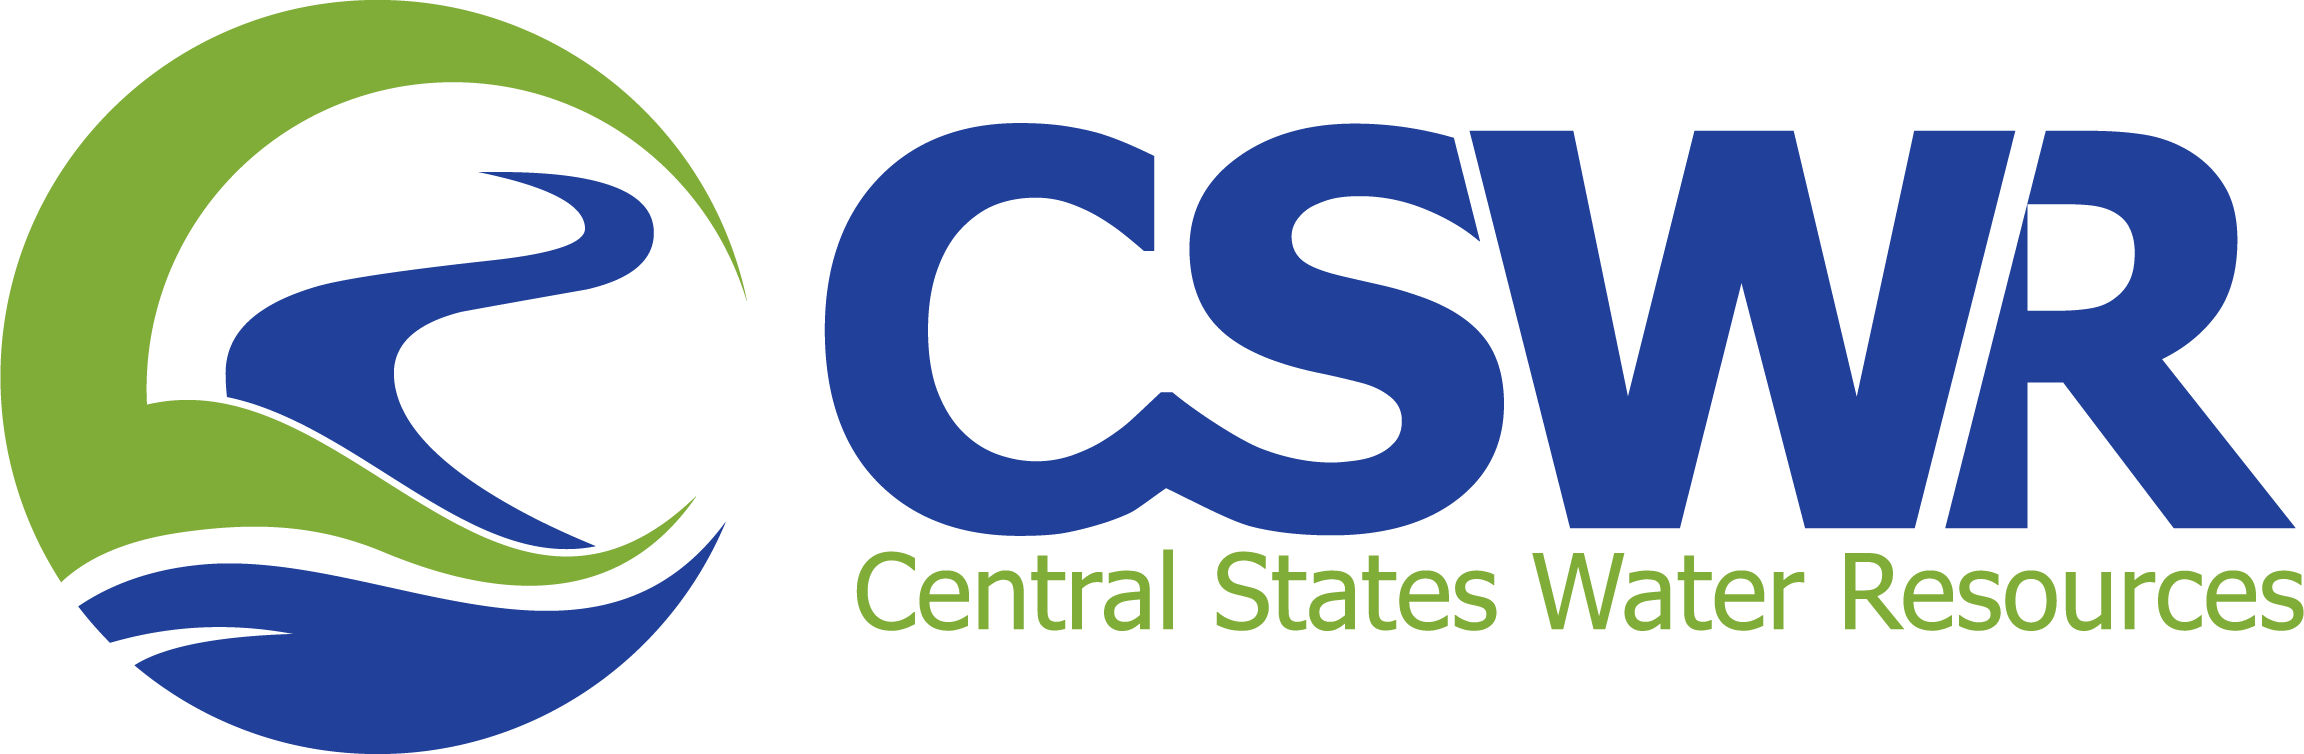 Central States Water Resources Acquires Water and Wastewater Systems in Missouri - PR Web